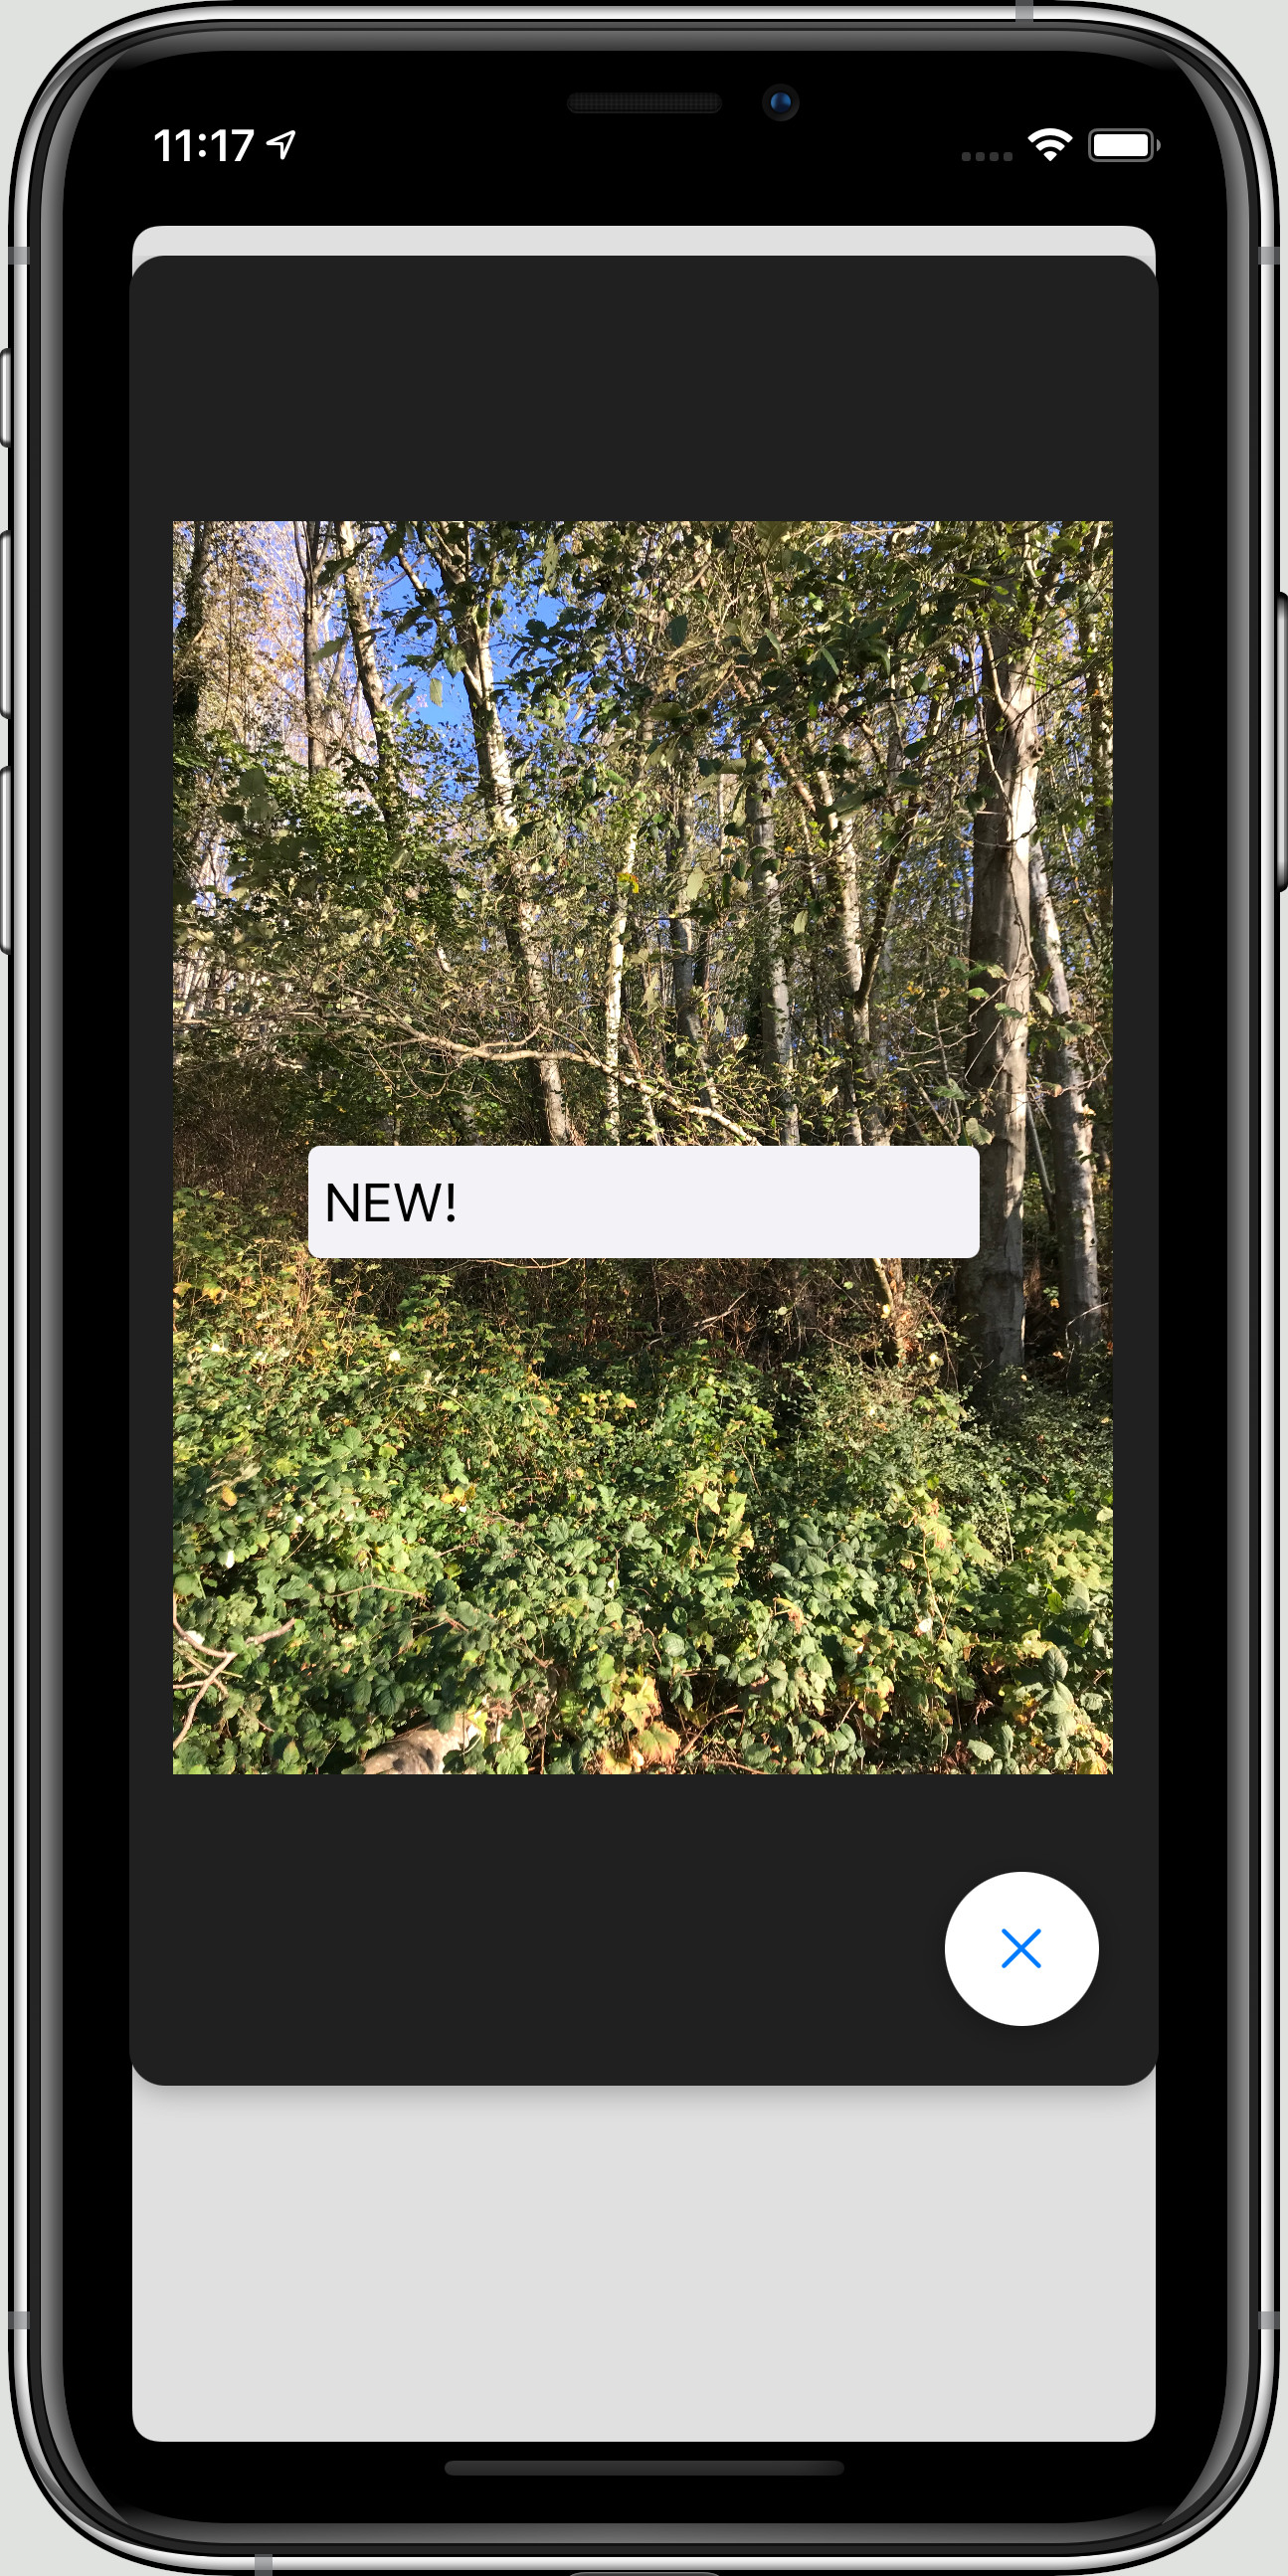 A Location Camera photo with text attached displayed on an iPhone